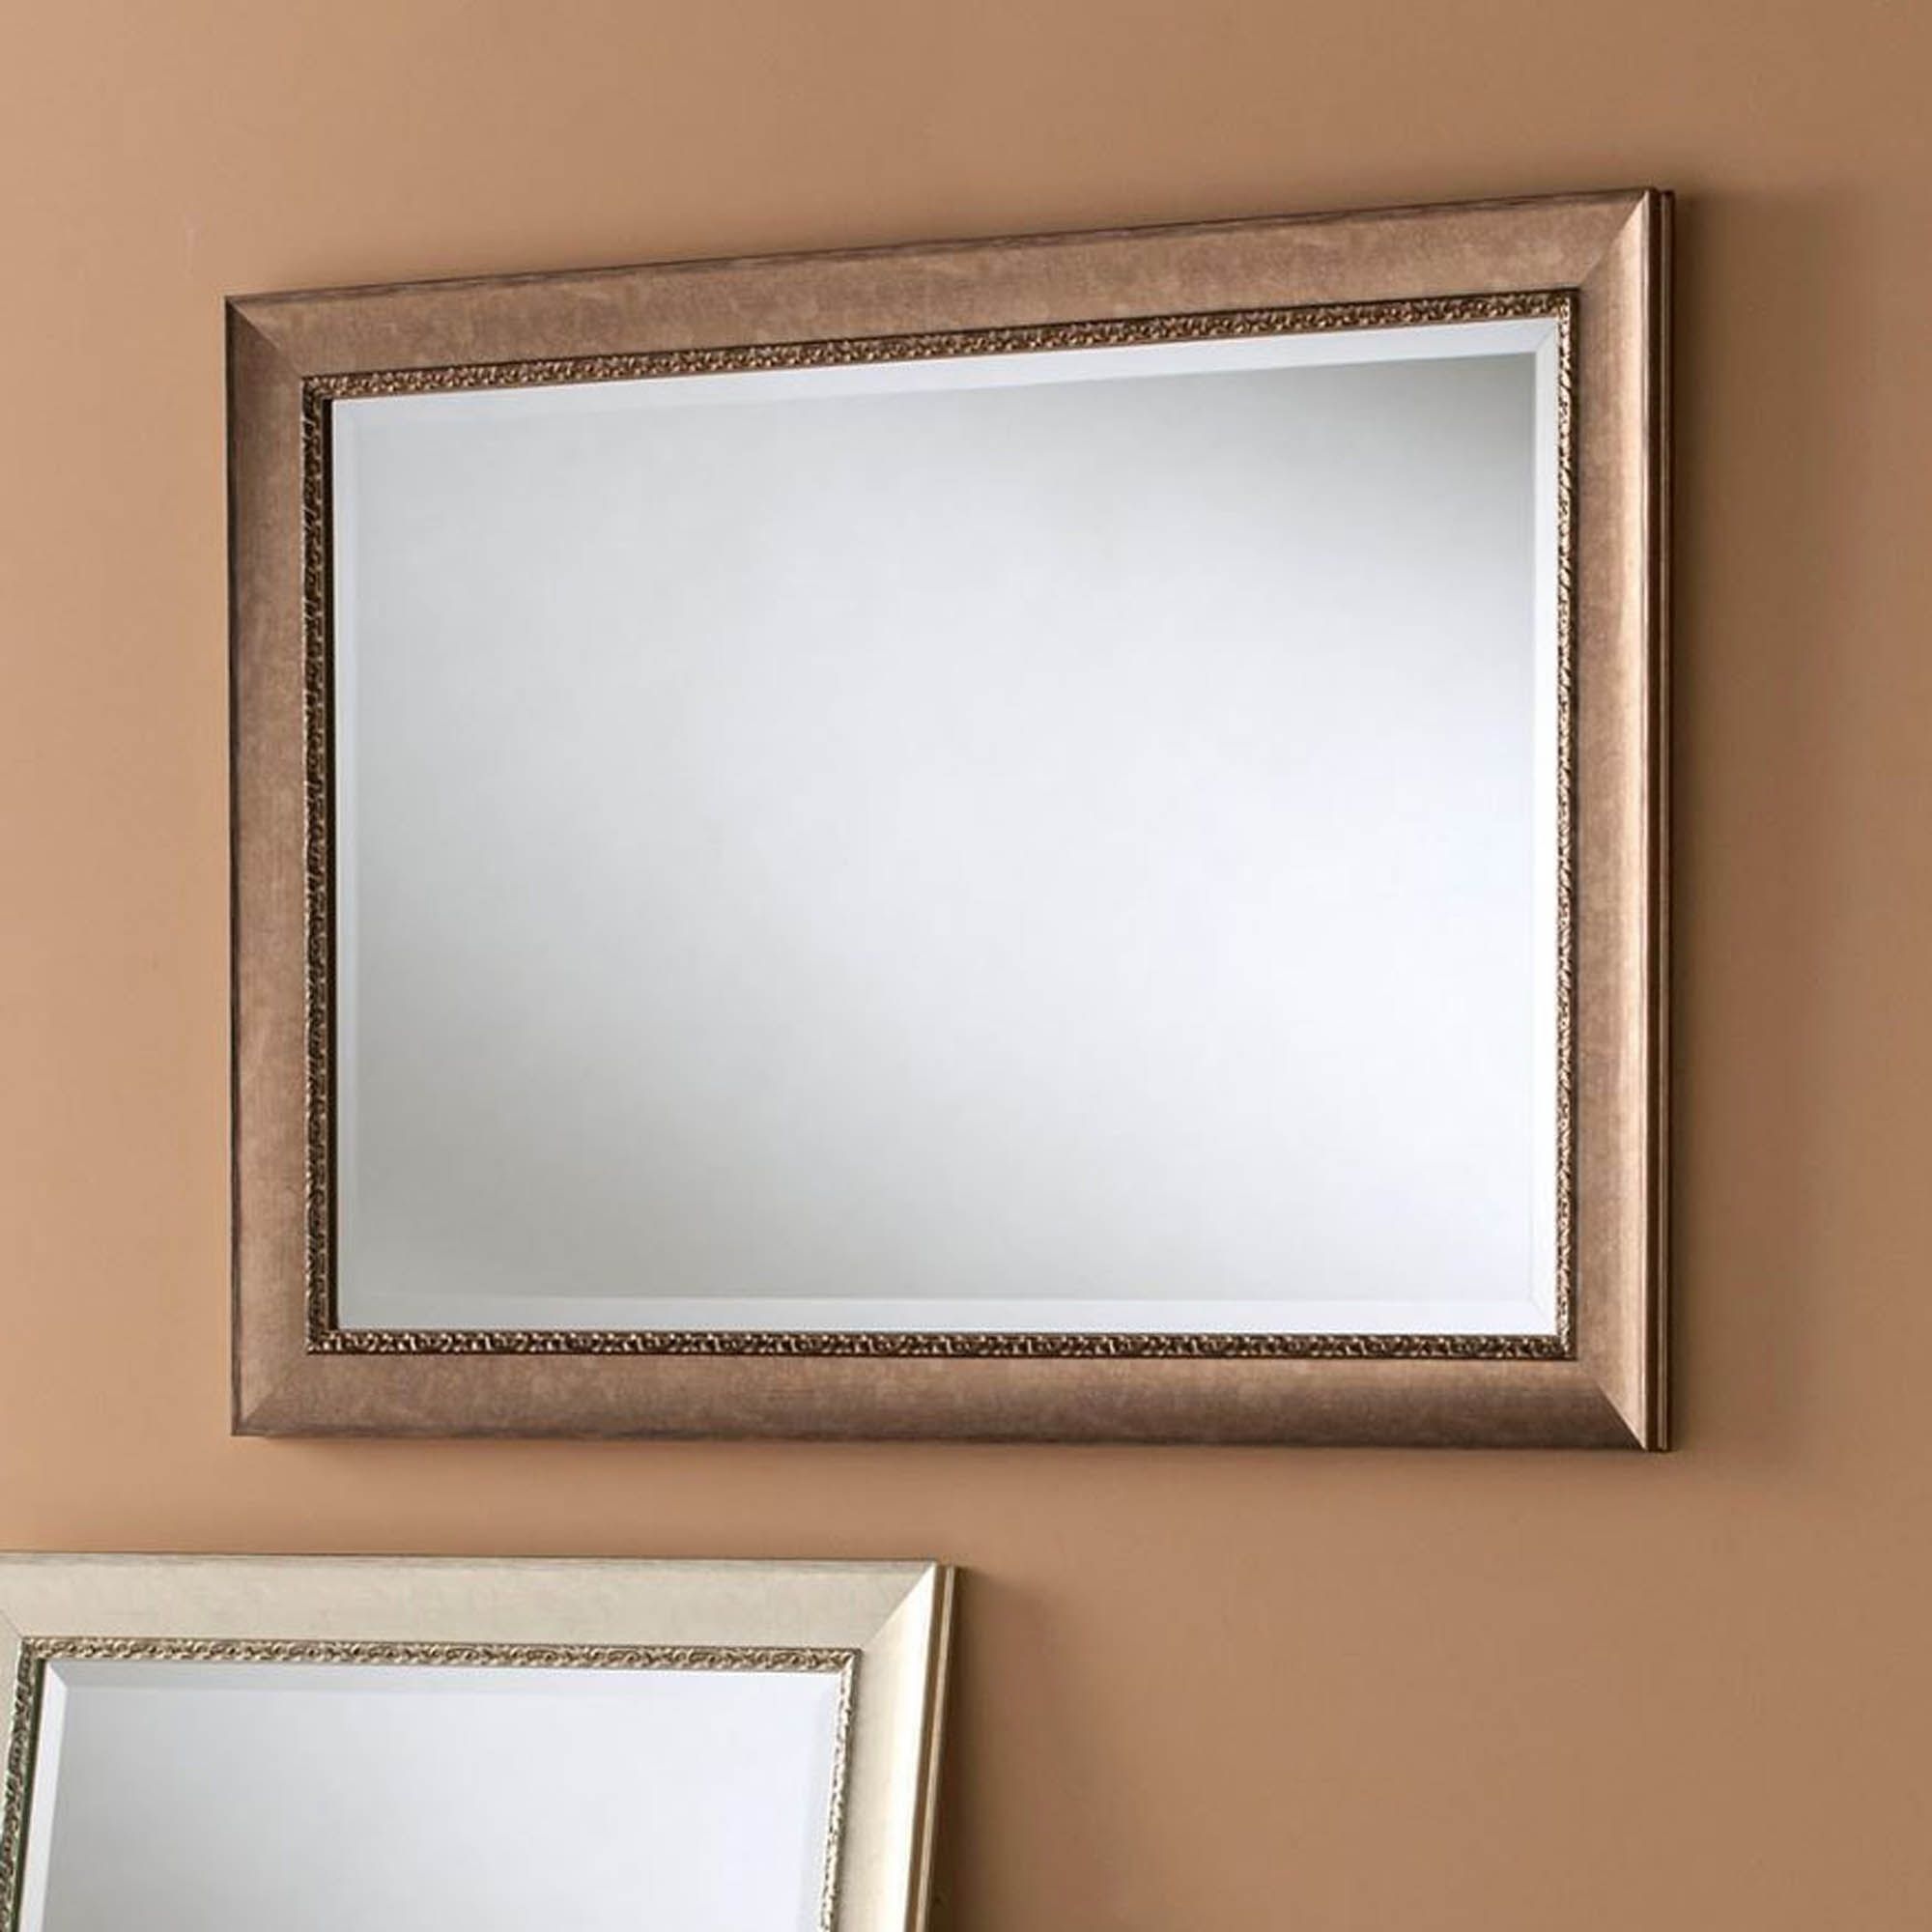 Ornate Rectangular Bronze Finished Wall Mirror | Homesdirect365 For Bronze Wall Mirrors (View 6 of 15)